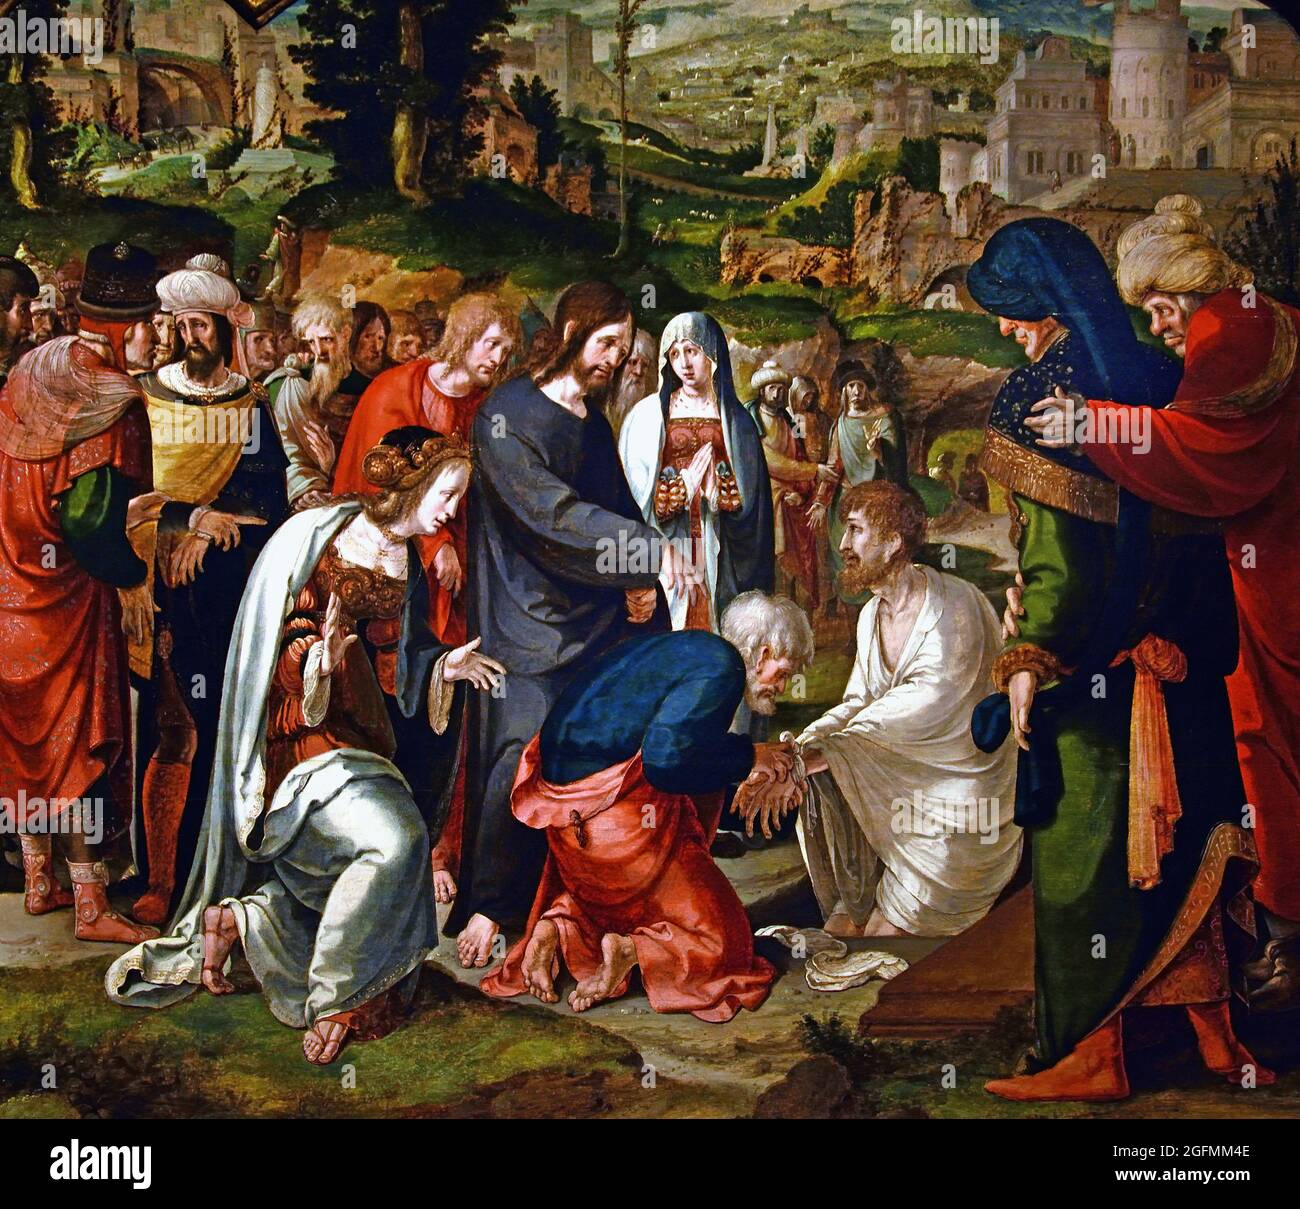 The Raising of Lazarus, Aertgen Claesz van Leyden (attributed to), 1530 -1535 oil on panel, 75.7cm ×  78.8cm  (This triptych was painted to commemorate a married couple, the man and woman shown kneeling on the wings. The central panel appropriately depicts the miracle of Christ raising Lazarus from the dead, an allusion to the promise of eternal life and the belief that death is overcome through faith in Christ.) Stock Photo